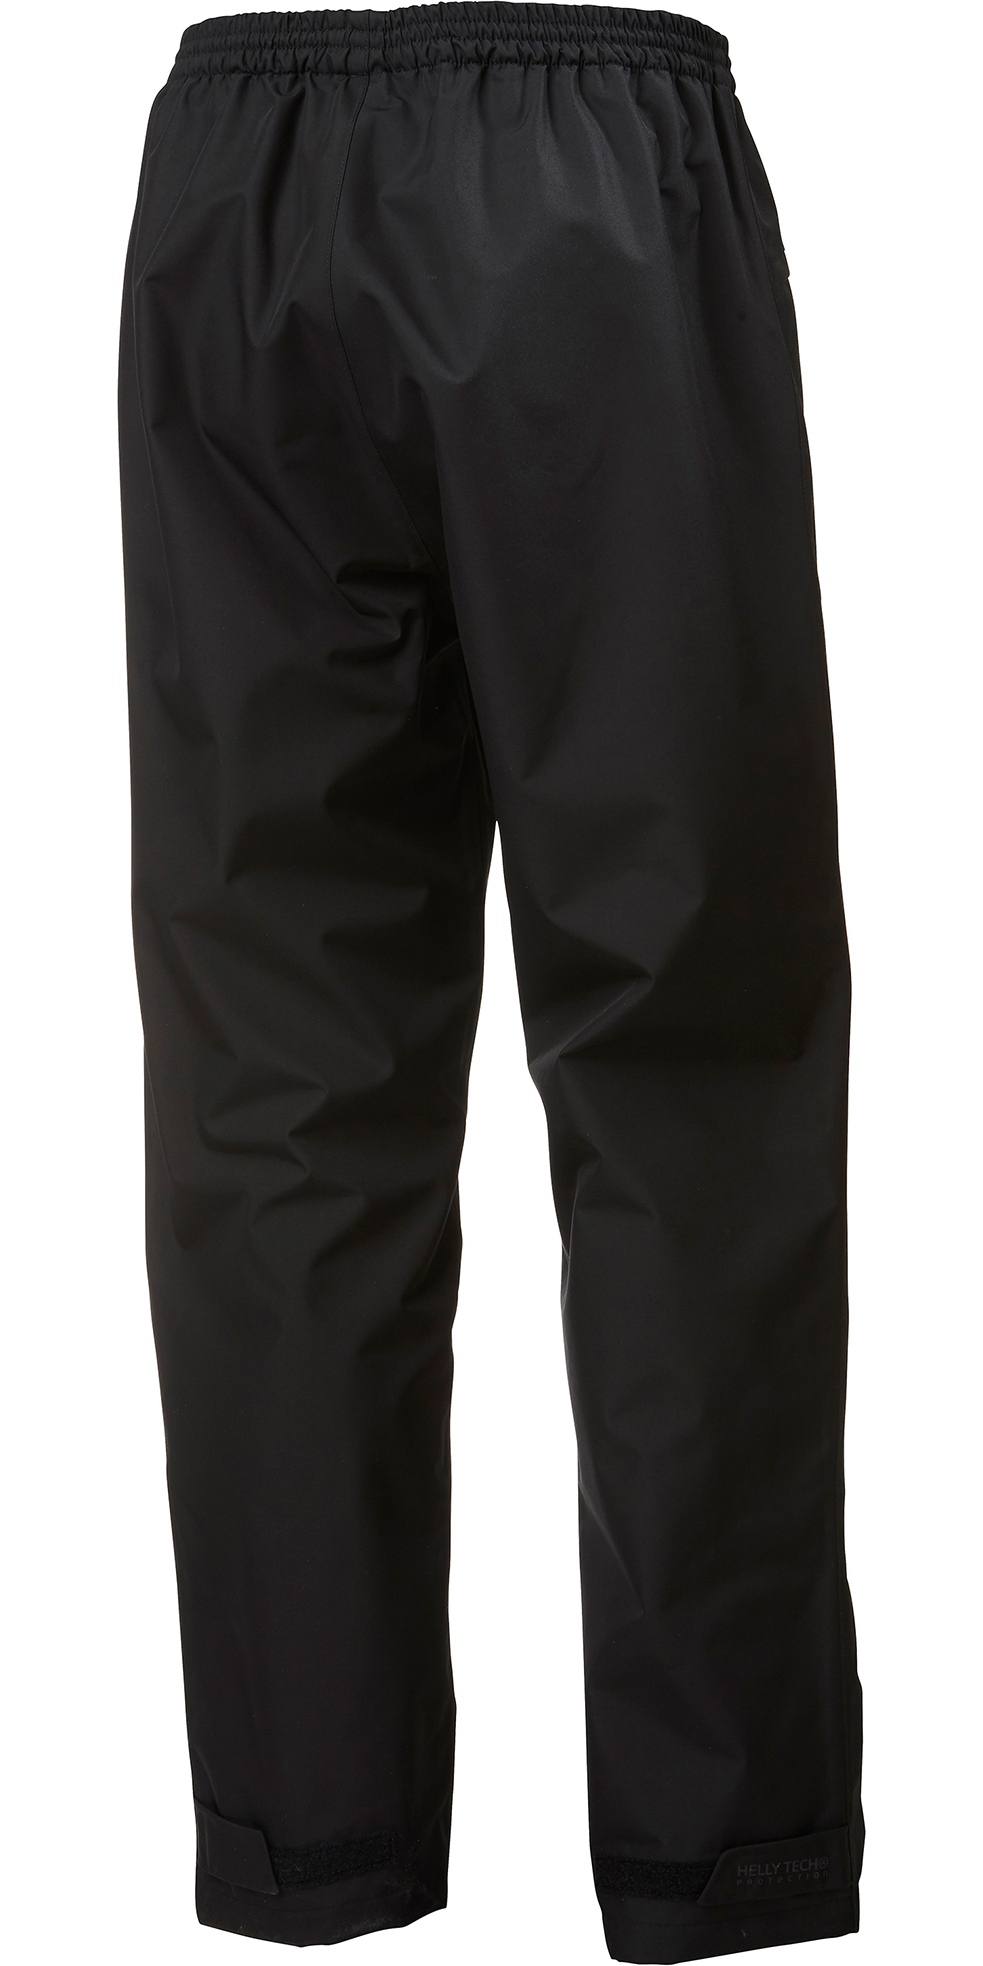 Helly Hansen Pants Dubliner Sailing Trousers 62652| Sailing| Yachting ...